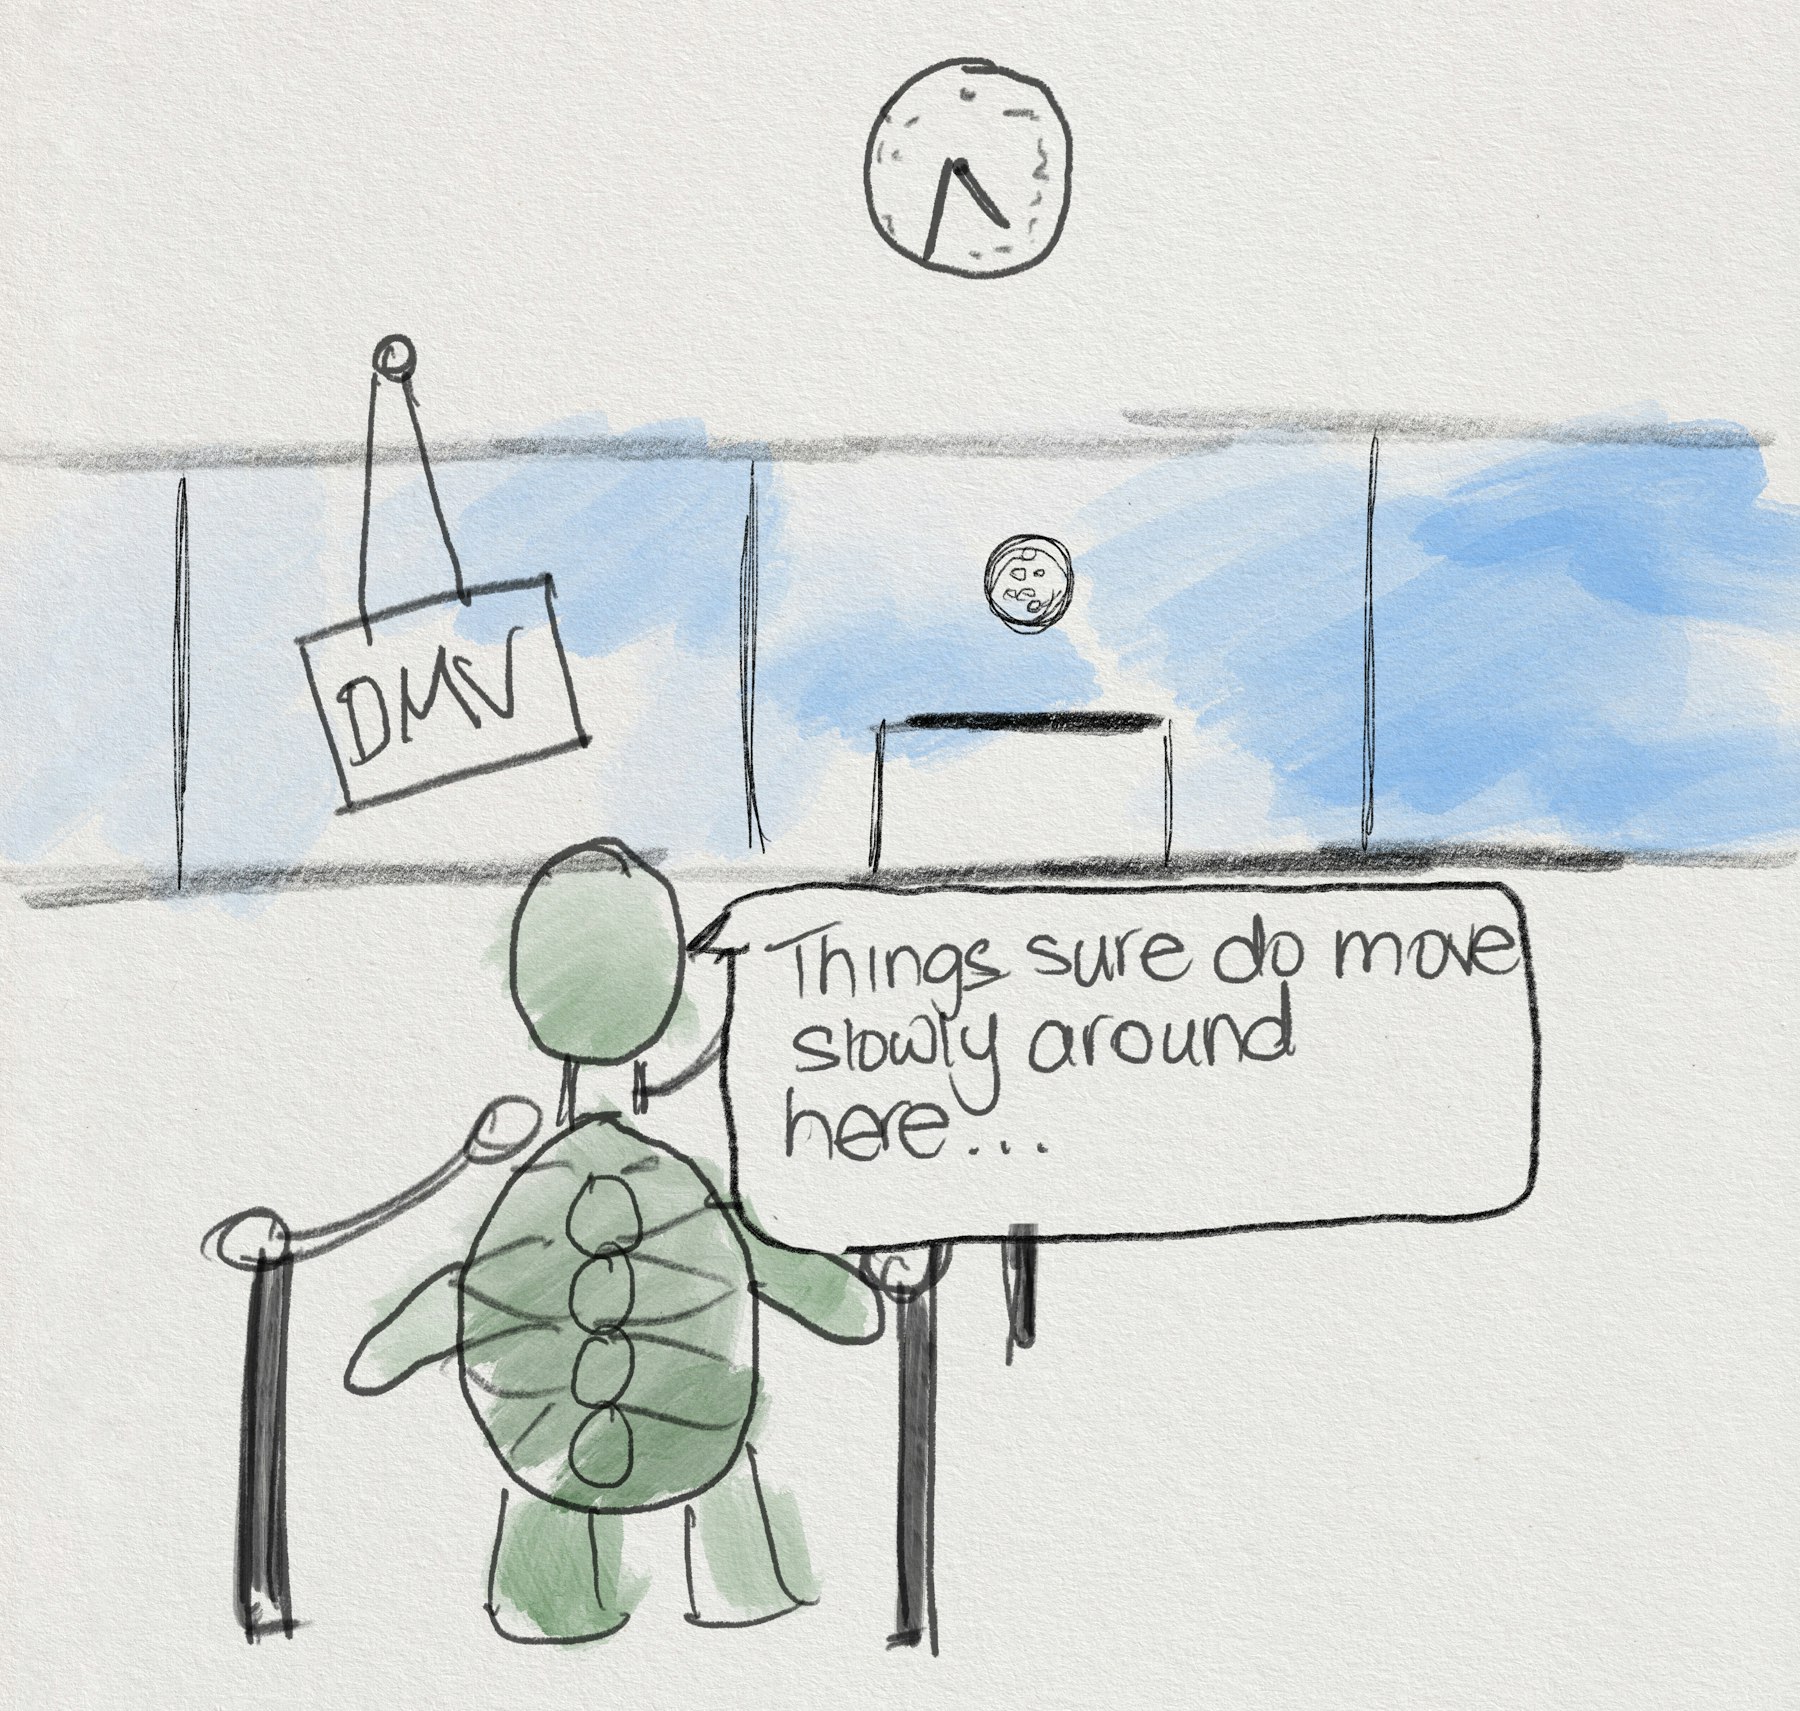 A turtle in the DMV saying &ldquo;Things sure do move slowly around here&rdquo;